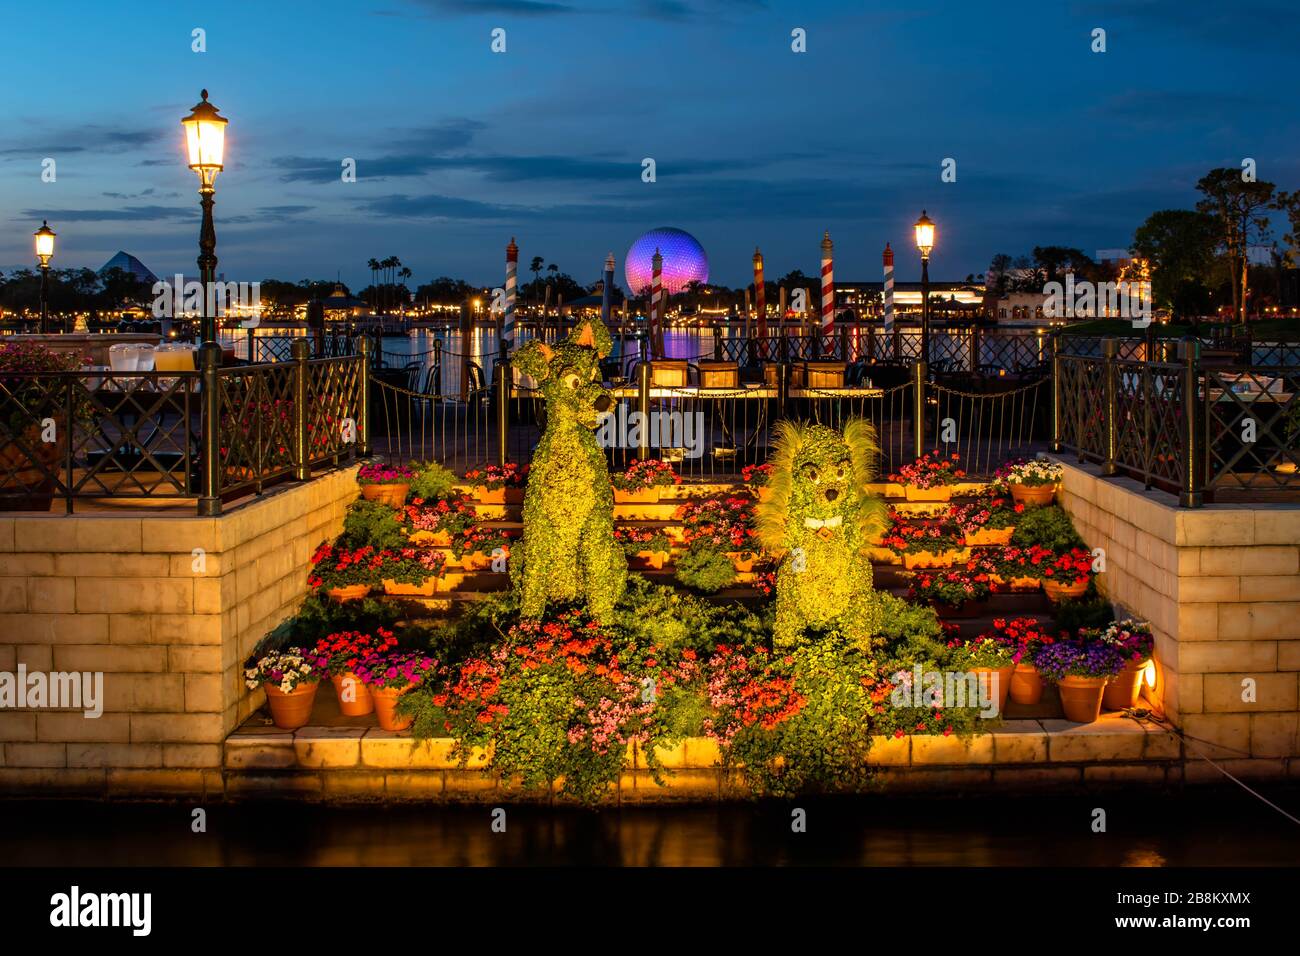 Orlando, Florida. March 11, 2020. Lady and Tramp in Italy Pavillion at Epcot Stock Photo